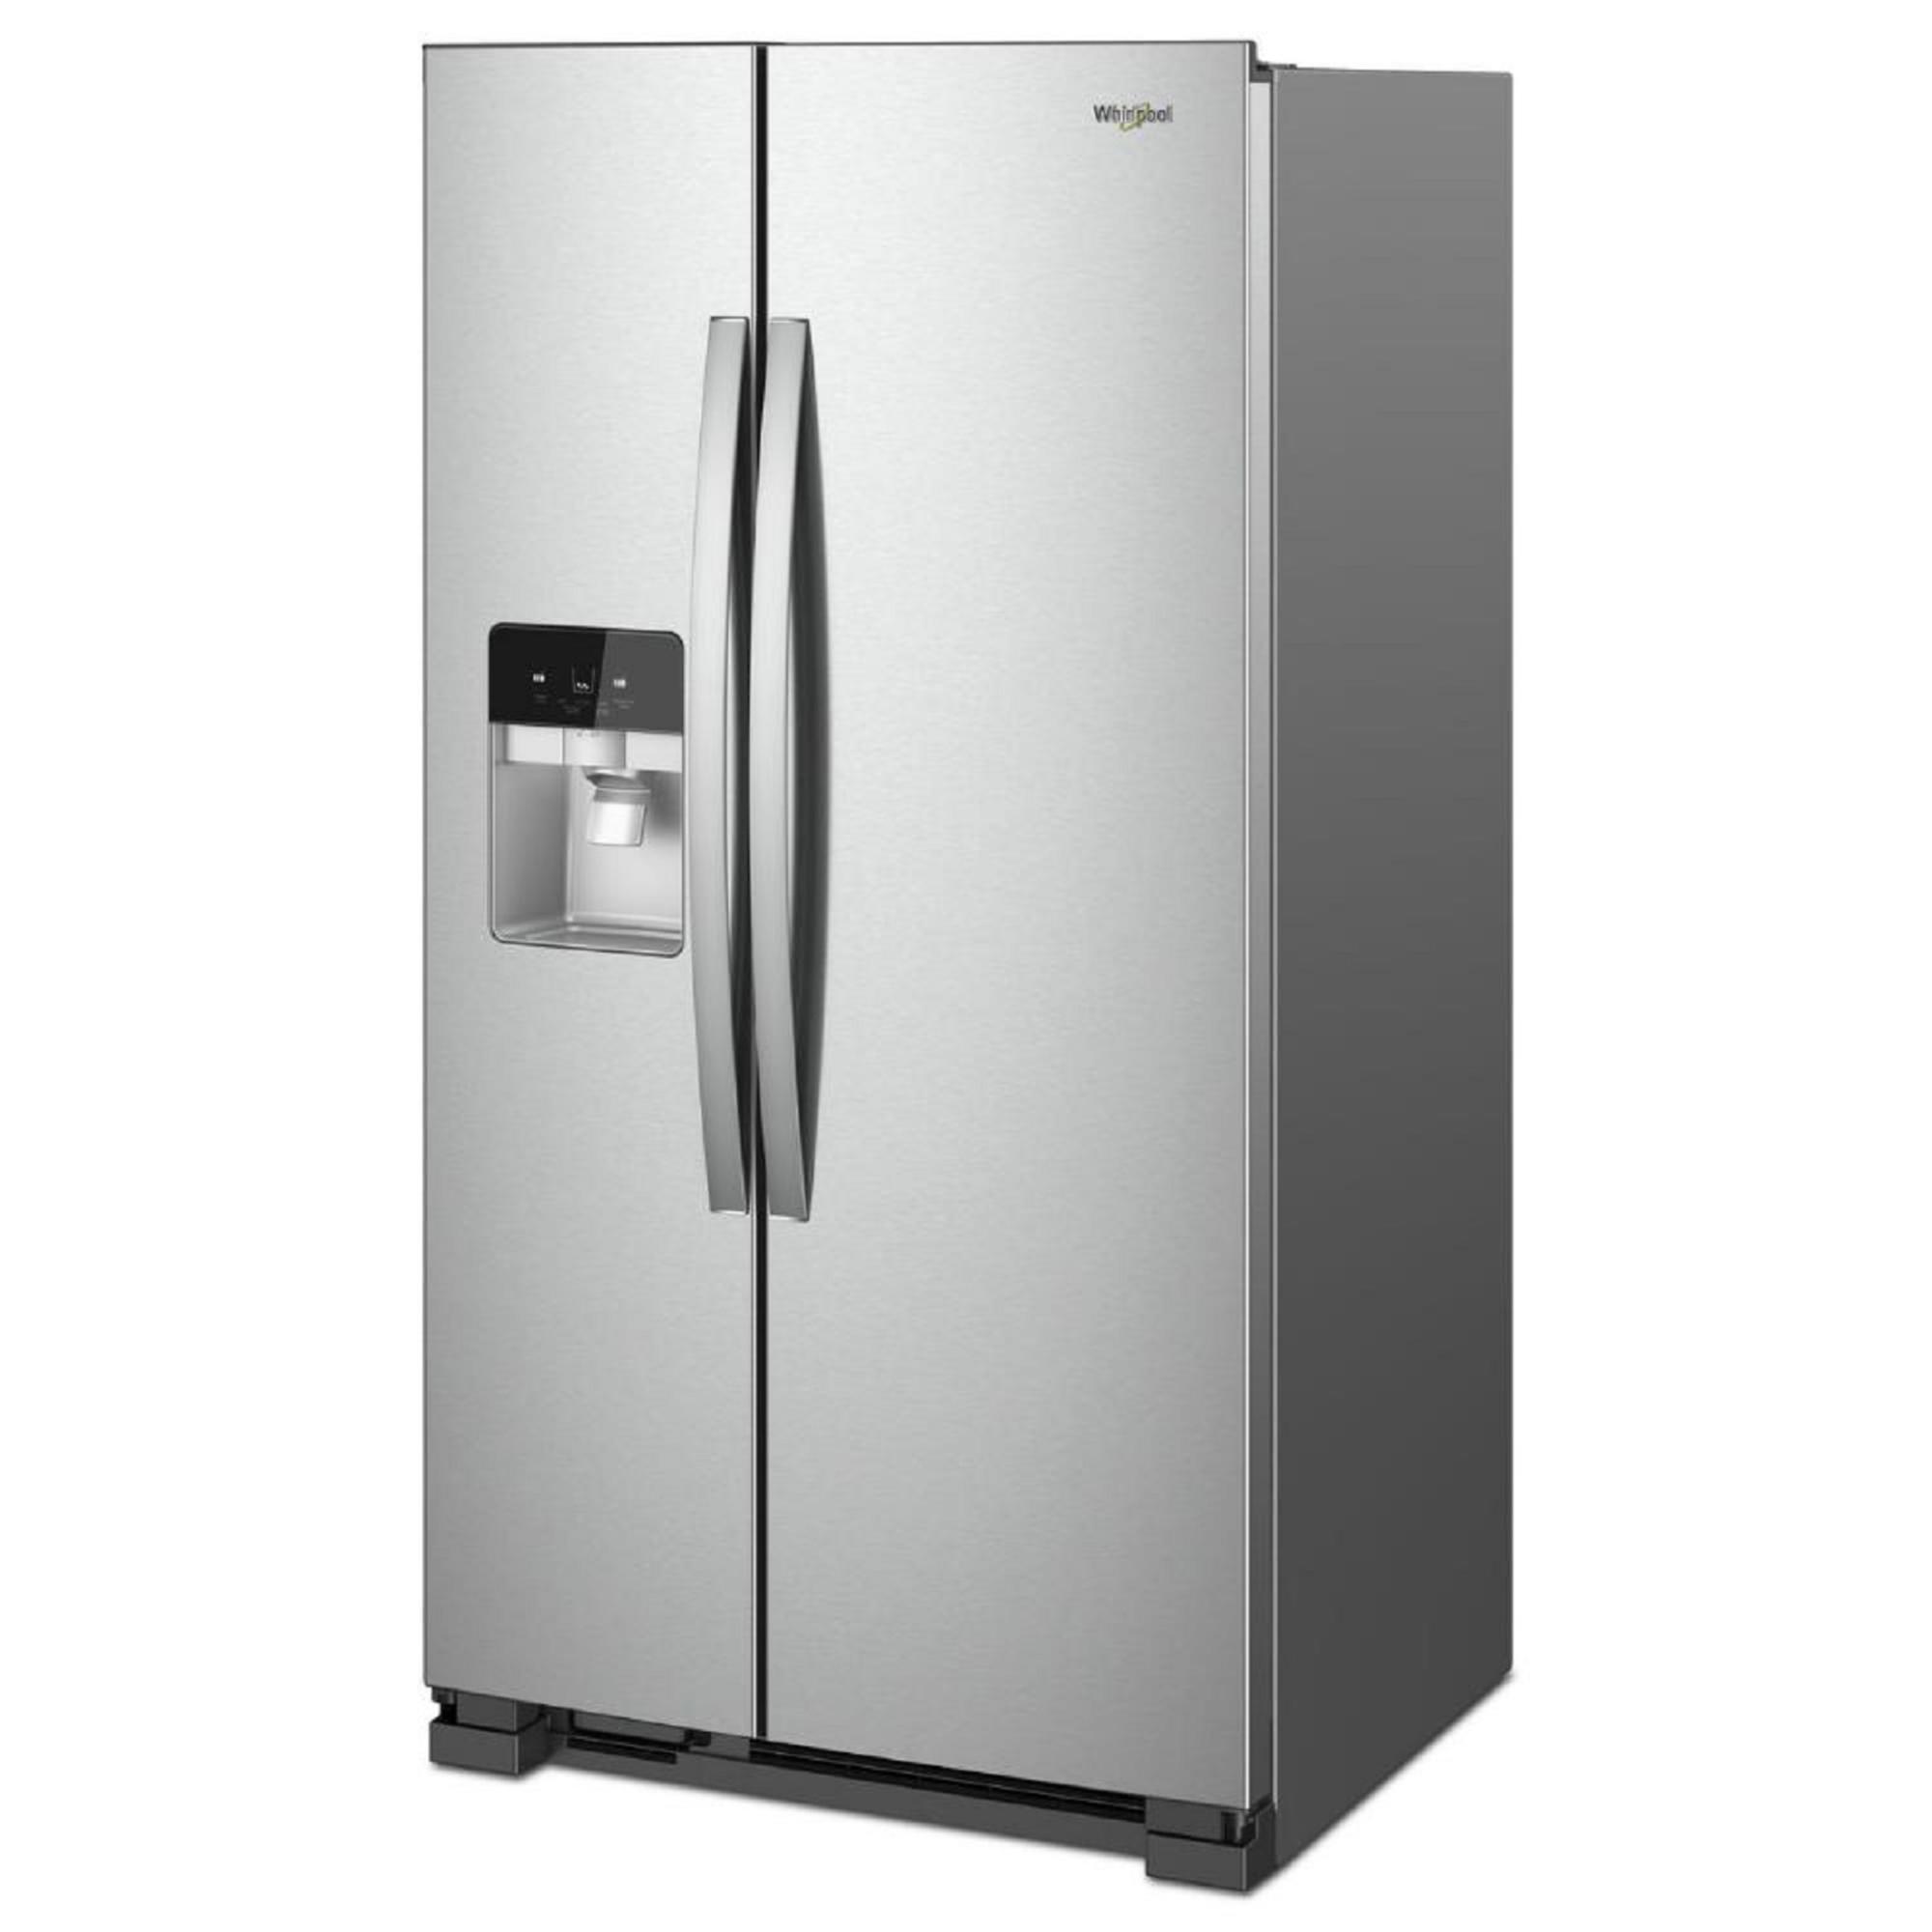 Whirlpool WRS325SDHZ 24.6 Cu. Ft. Side-by-Side Refrigerator - Stainless steel